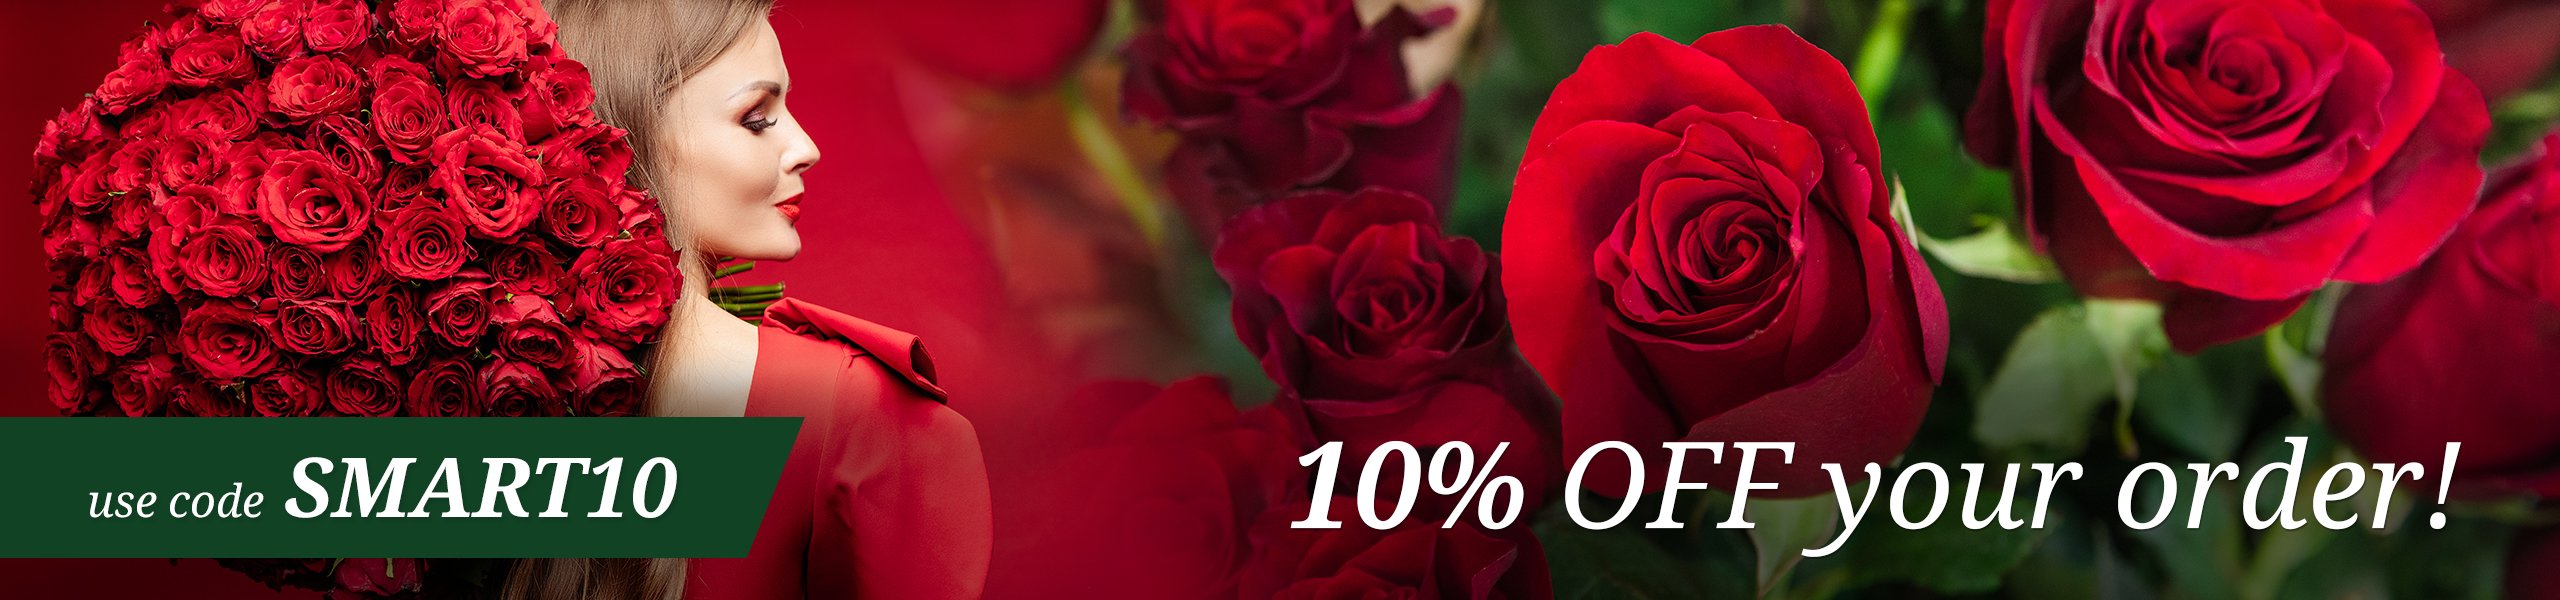 10% Off Your Order | SMART10